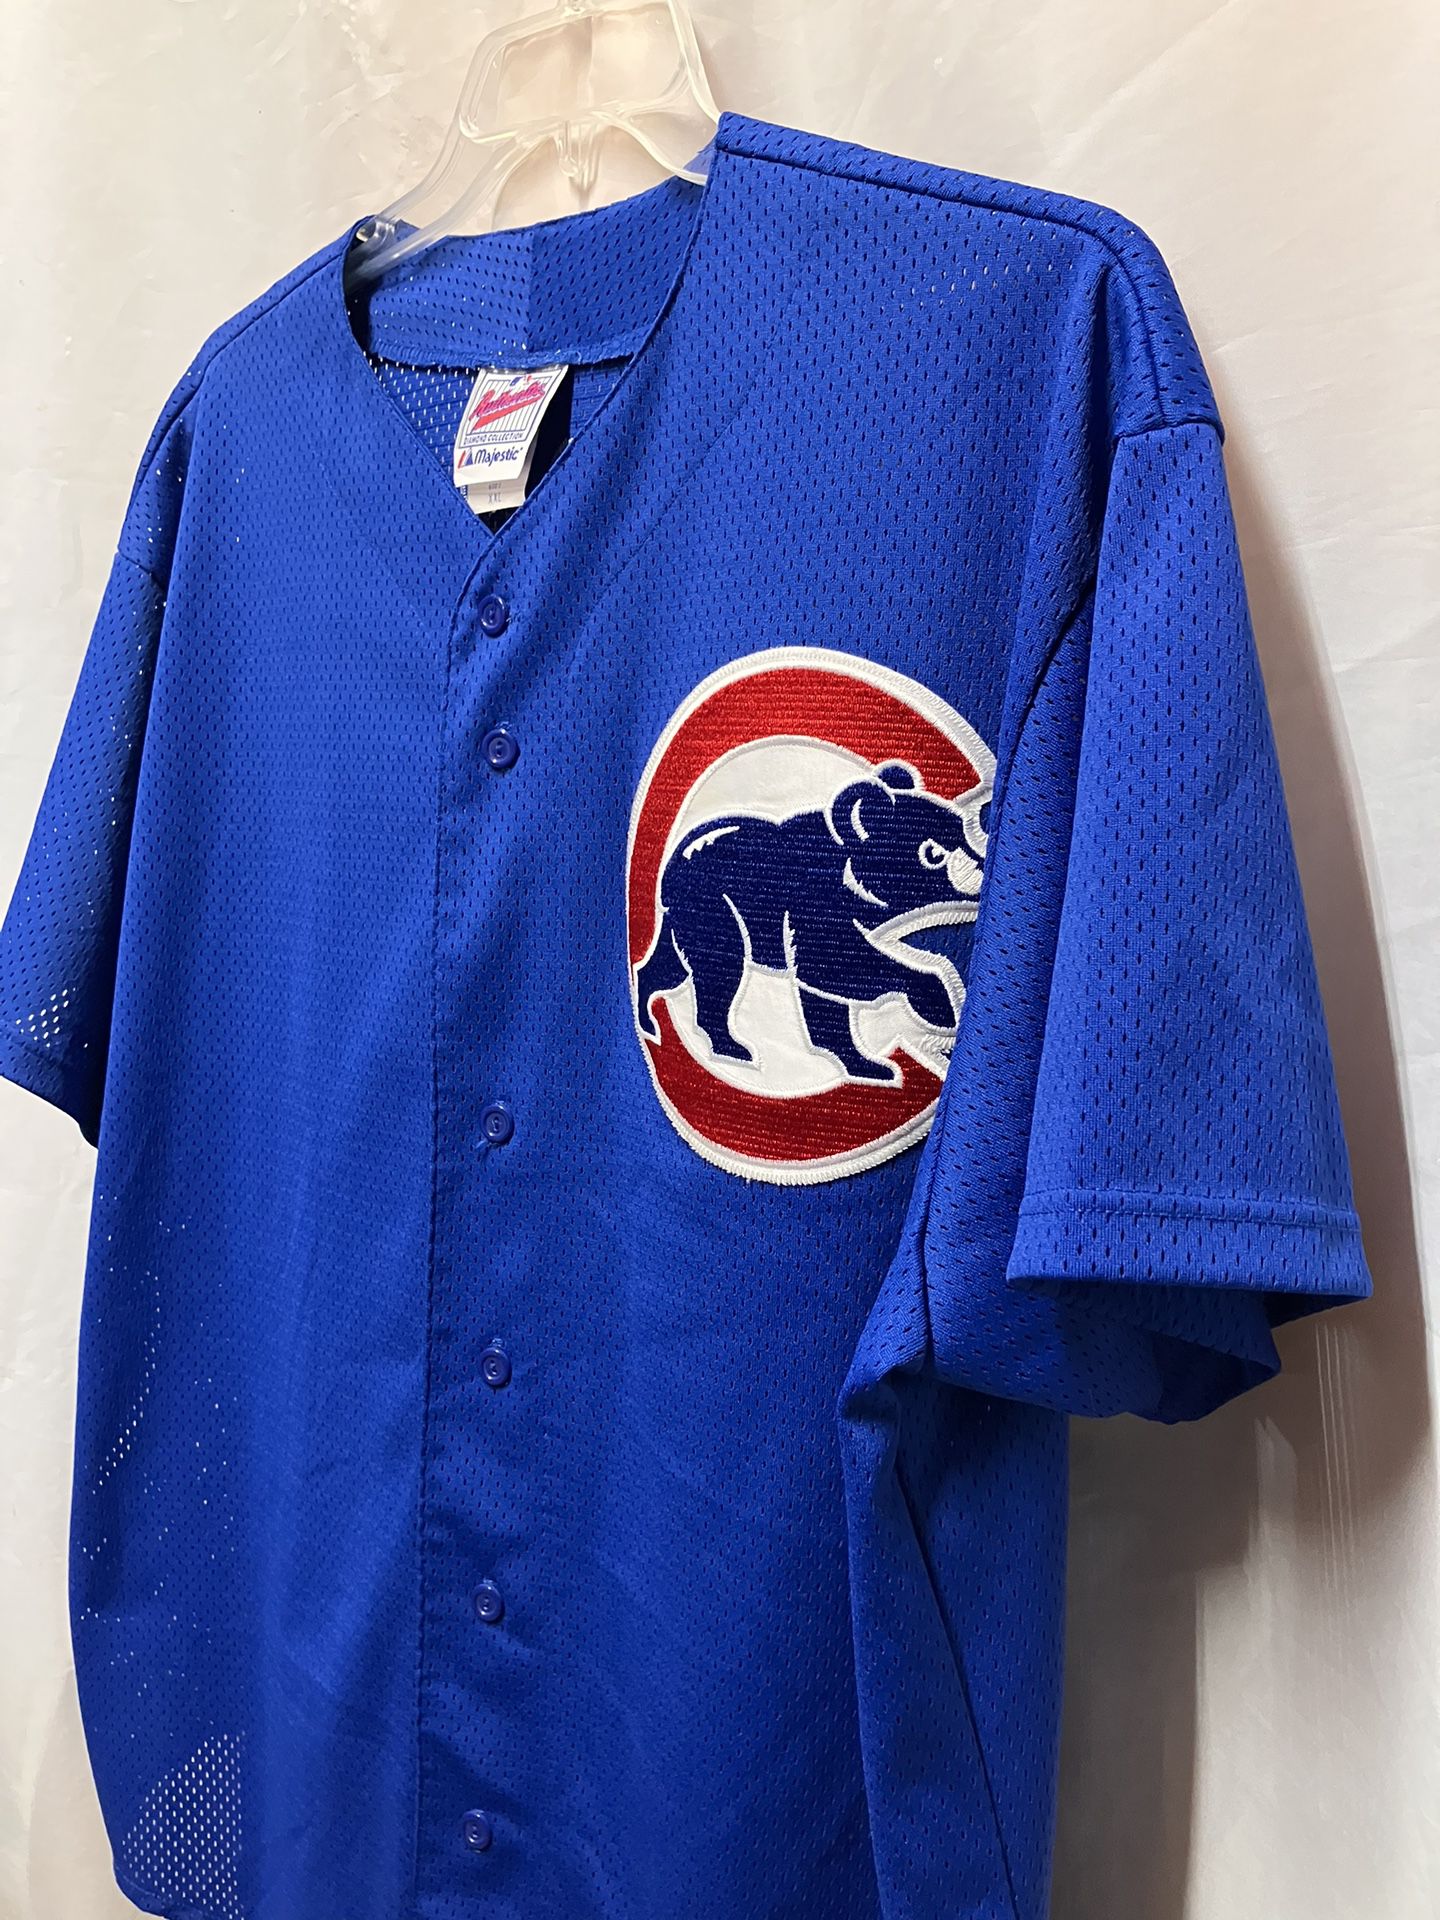 2002-04 CHICAGO CUBS SOSA #21 AUTHENTIC MAJESTIC JERSEY (AWAY) XL